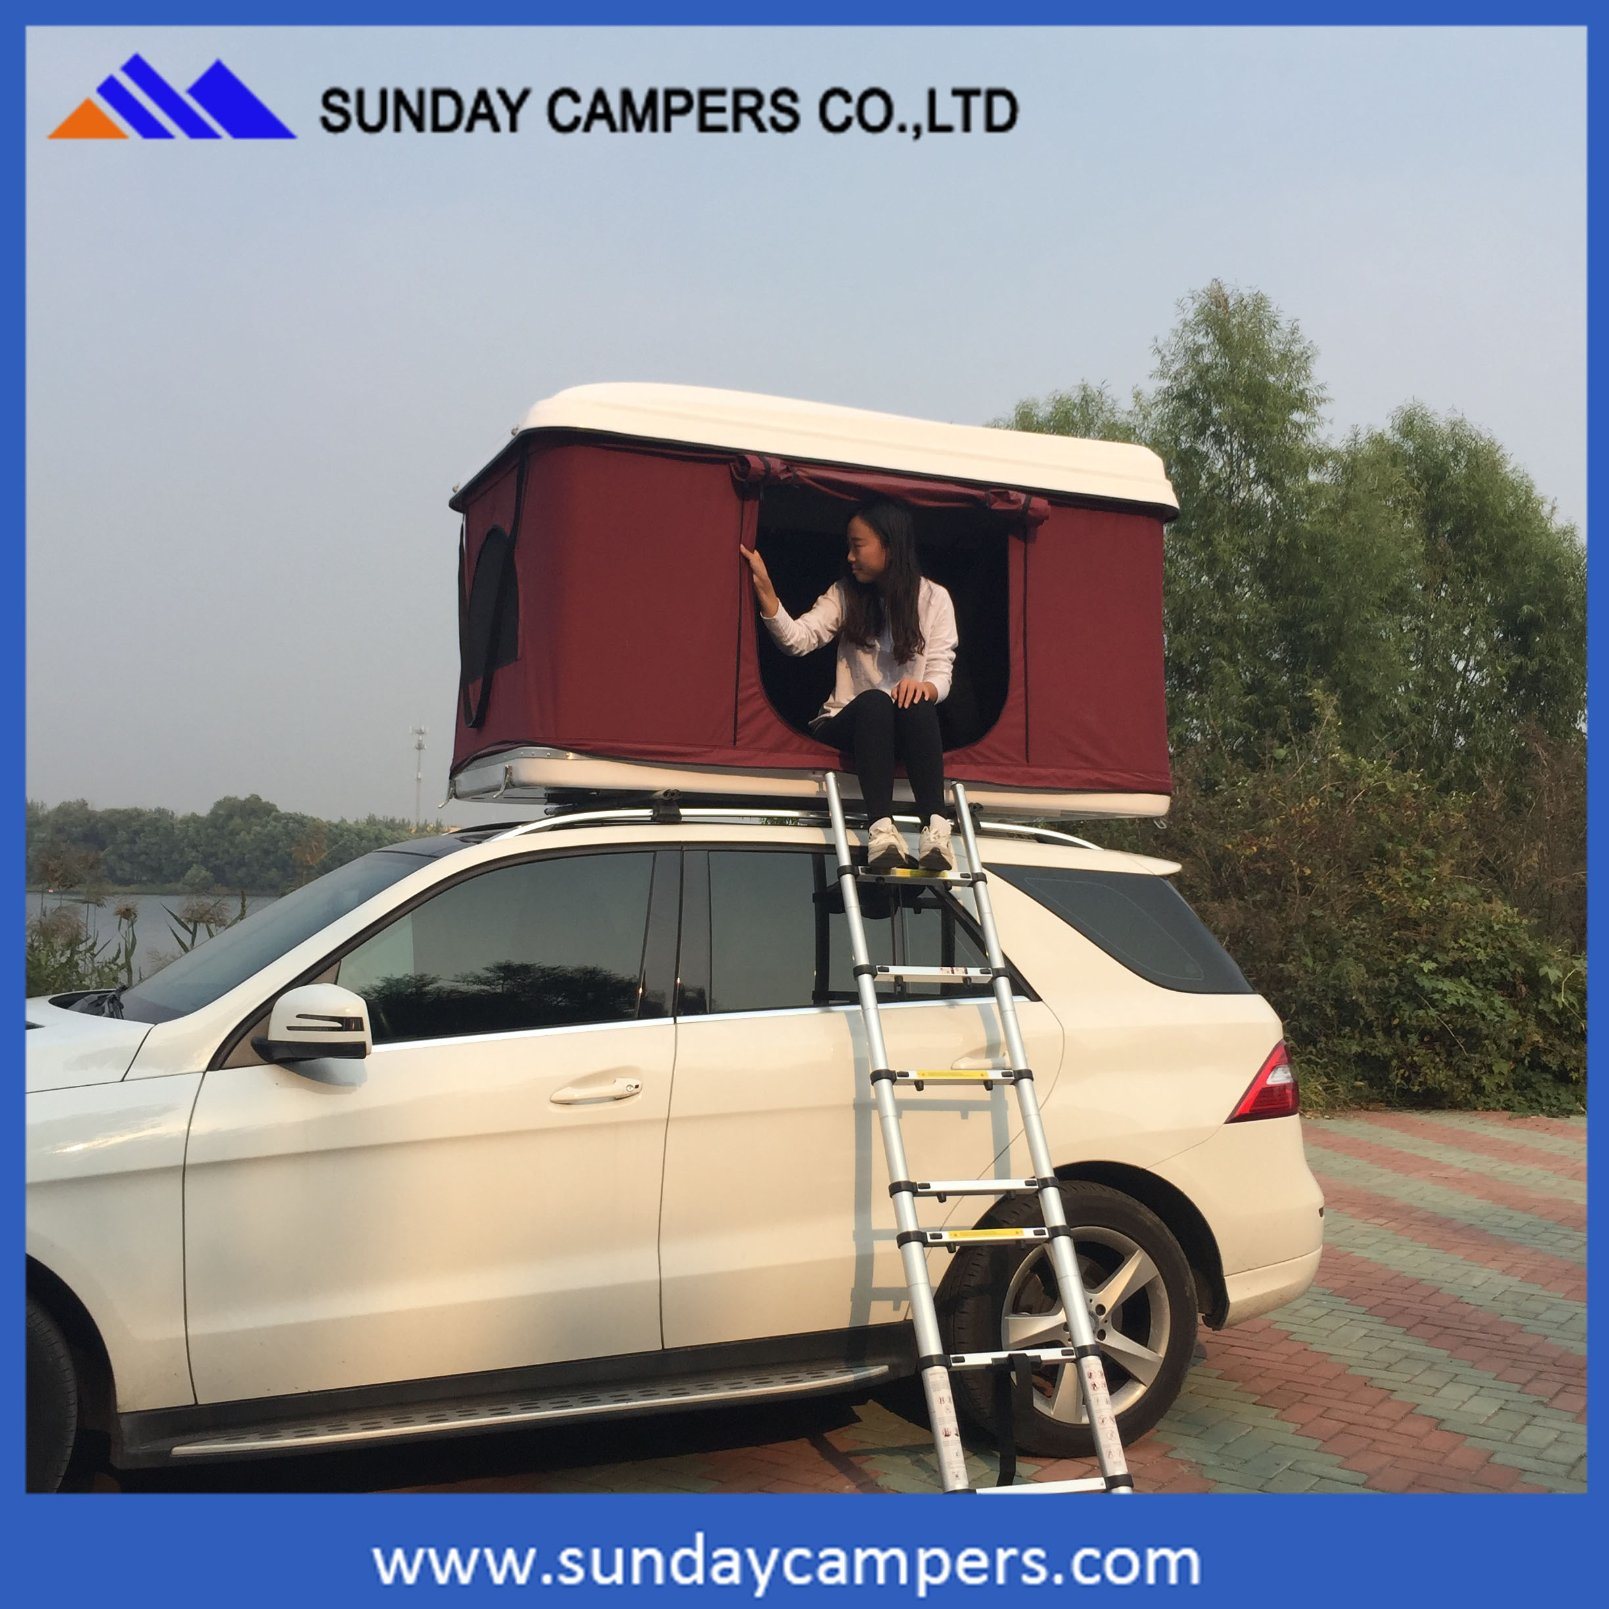 4WD Hard Top Roof Tent